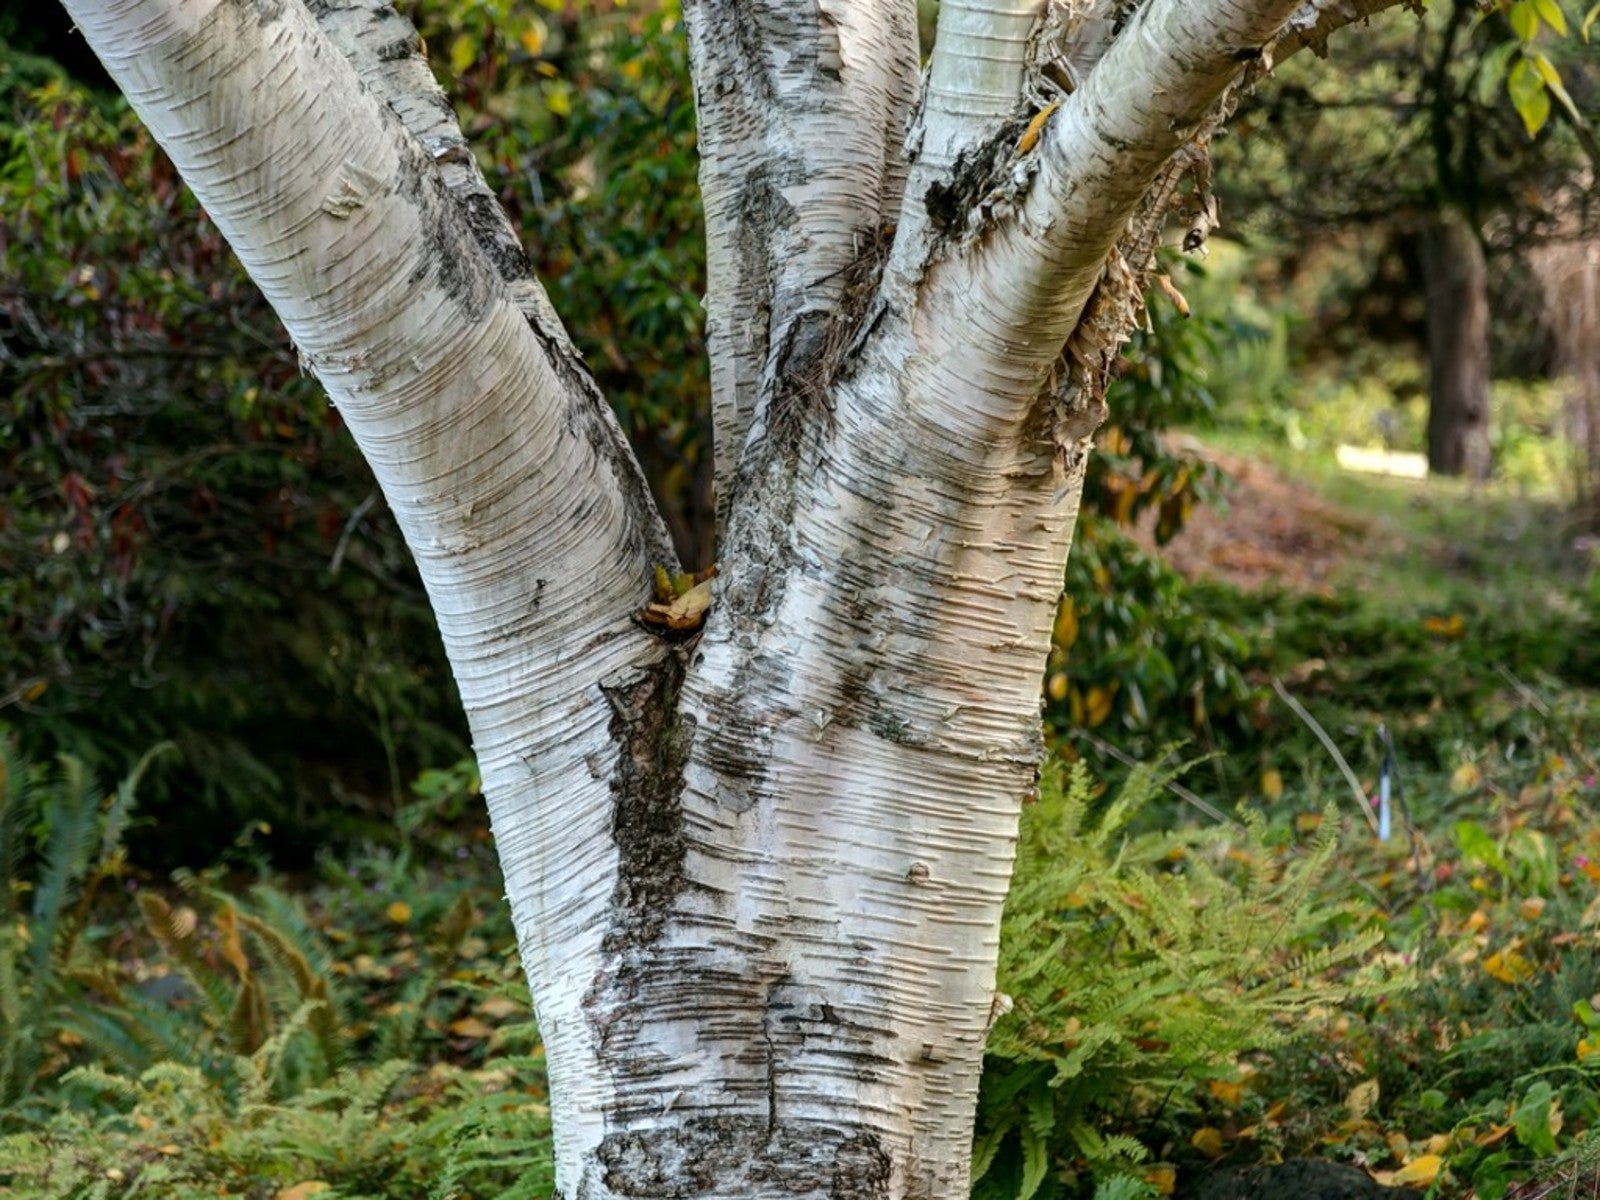 Planting And Caring For A White Barked Himalayan Birch